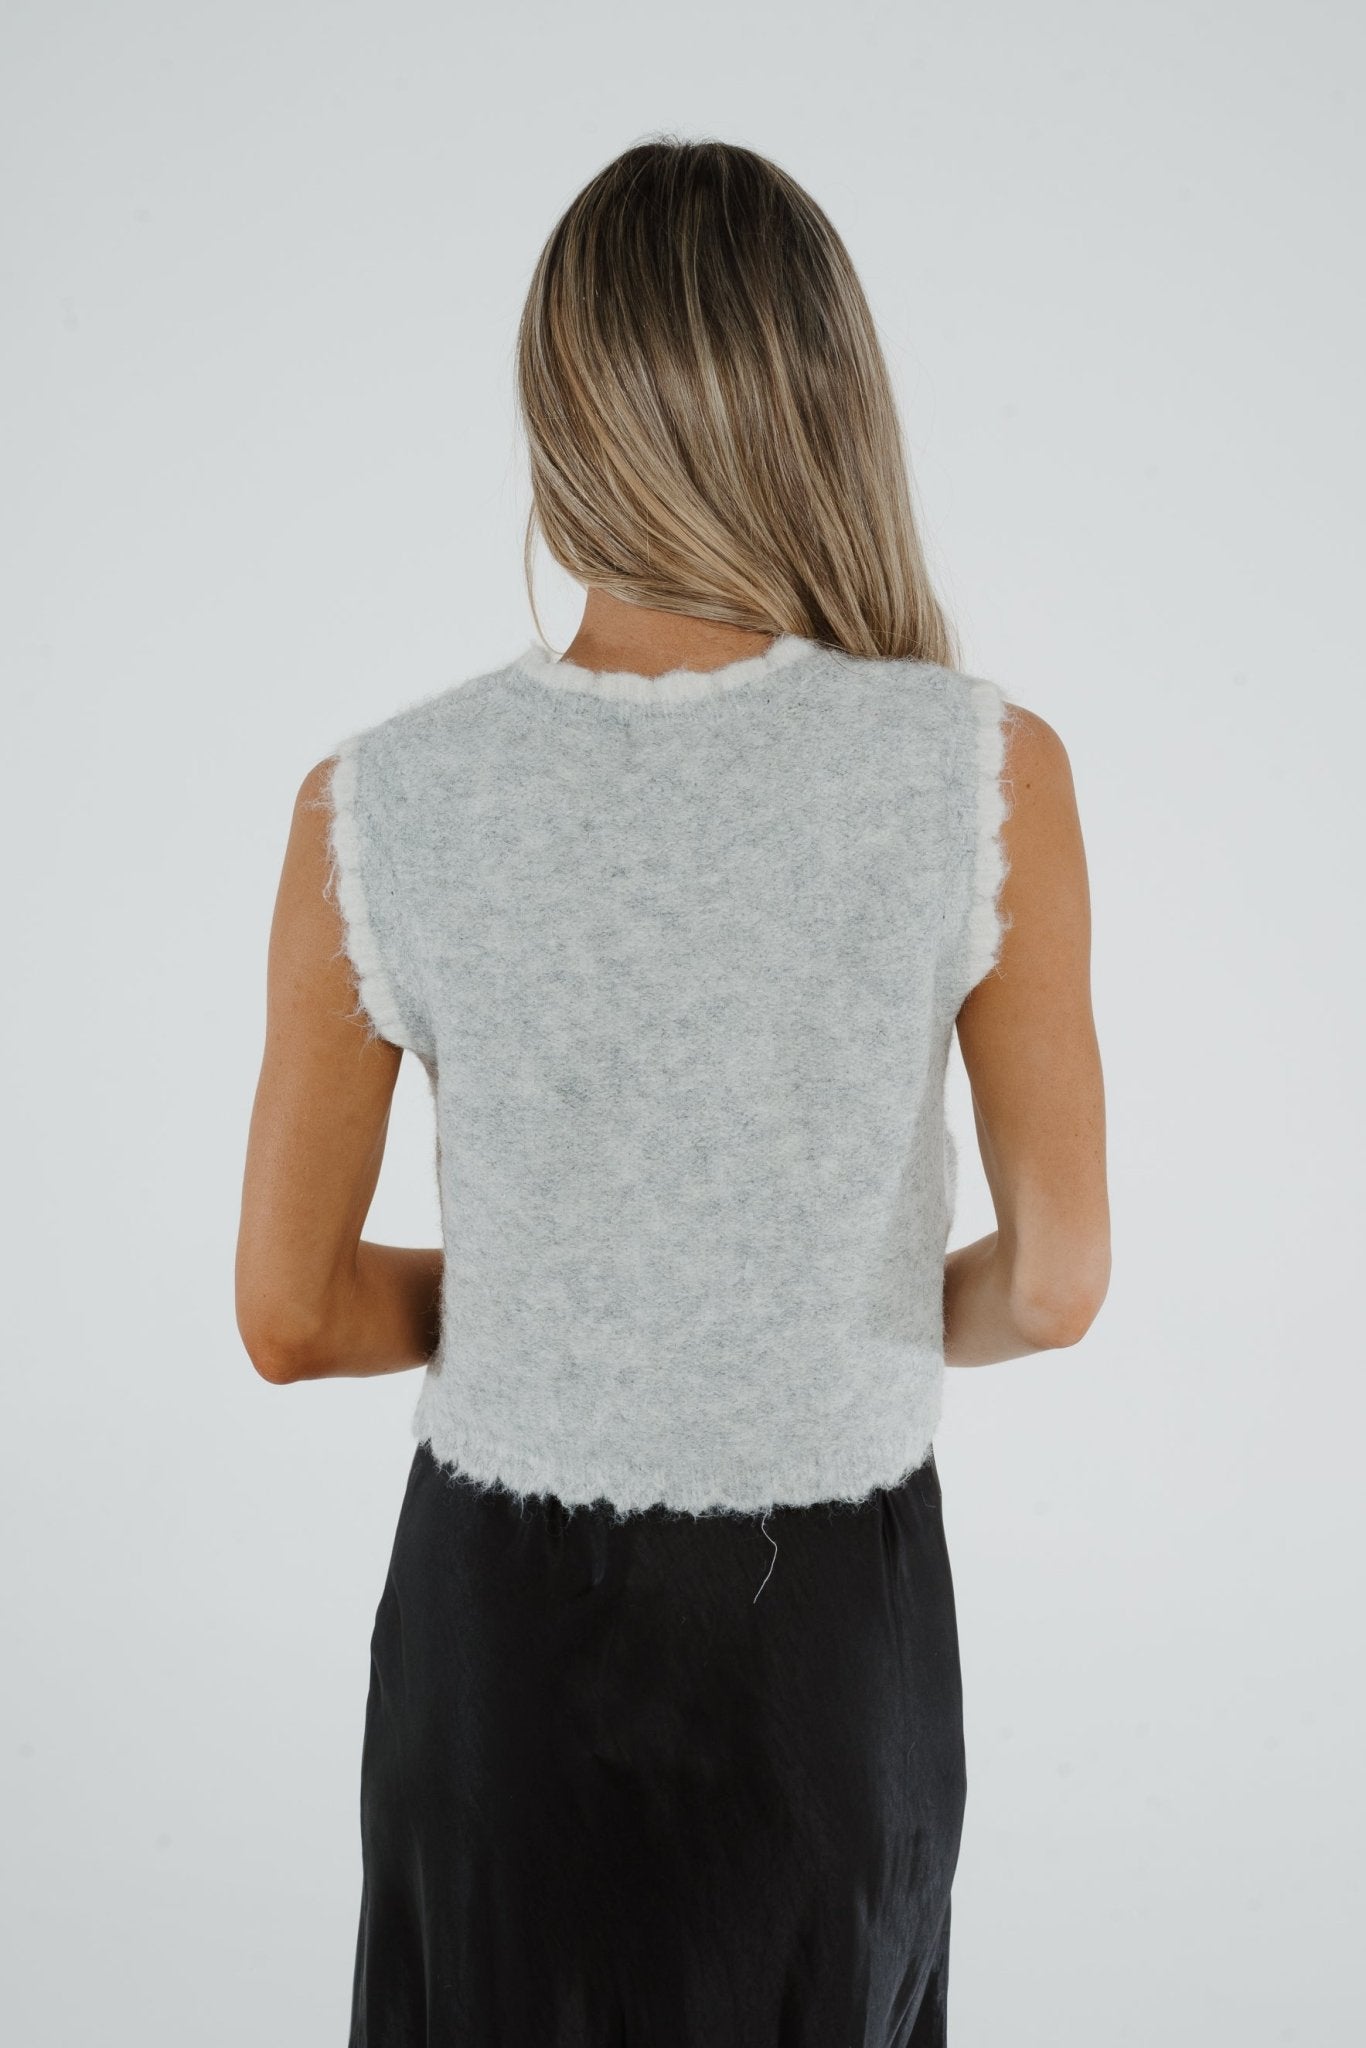 Holly Embroidered Sleeveless Knit In Grey - The Walk in Wardrobe